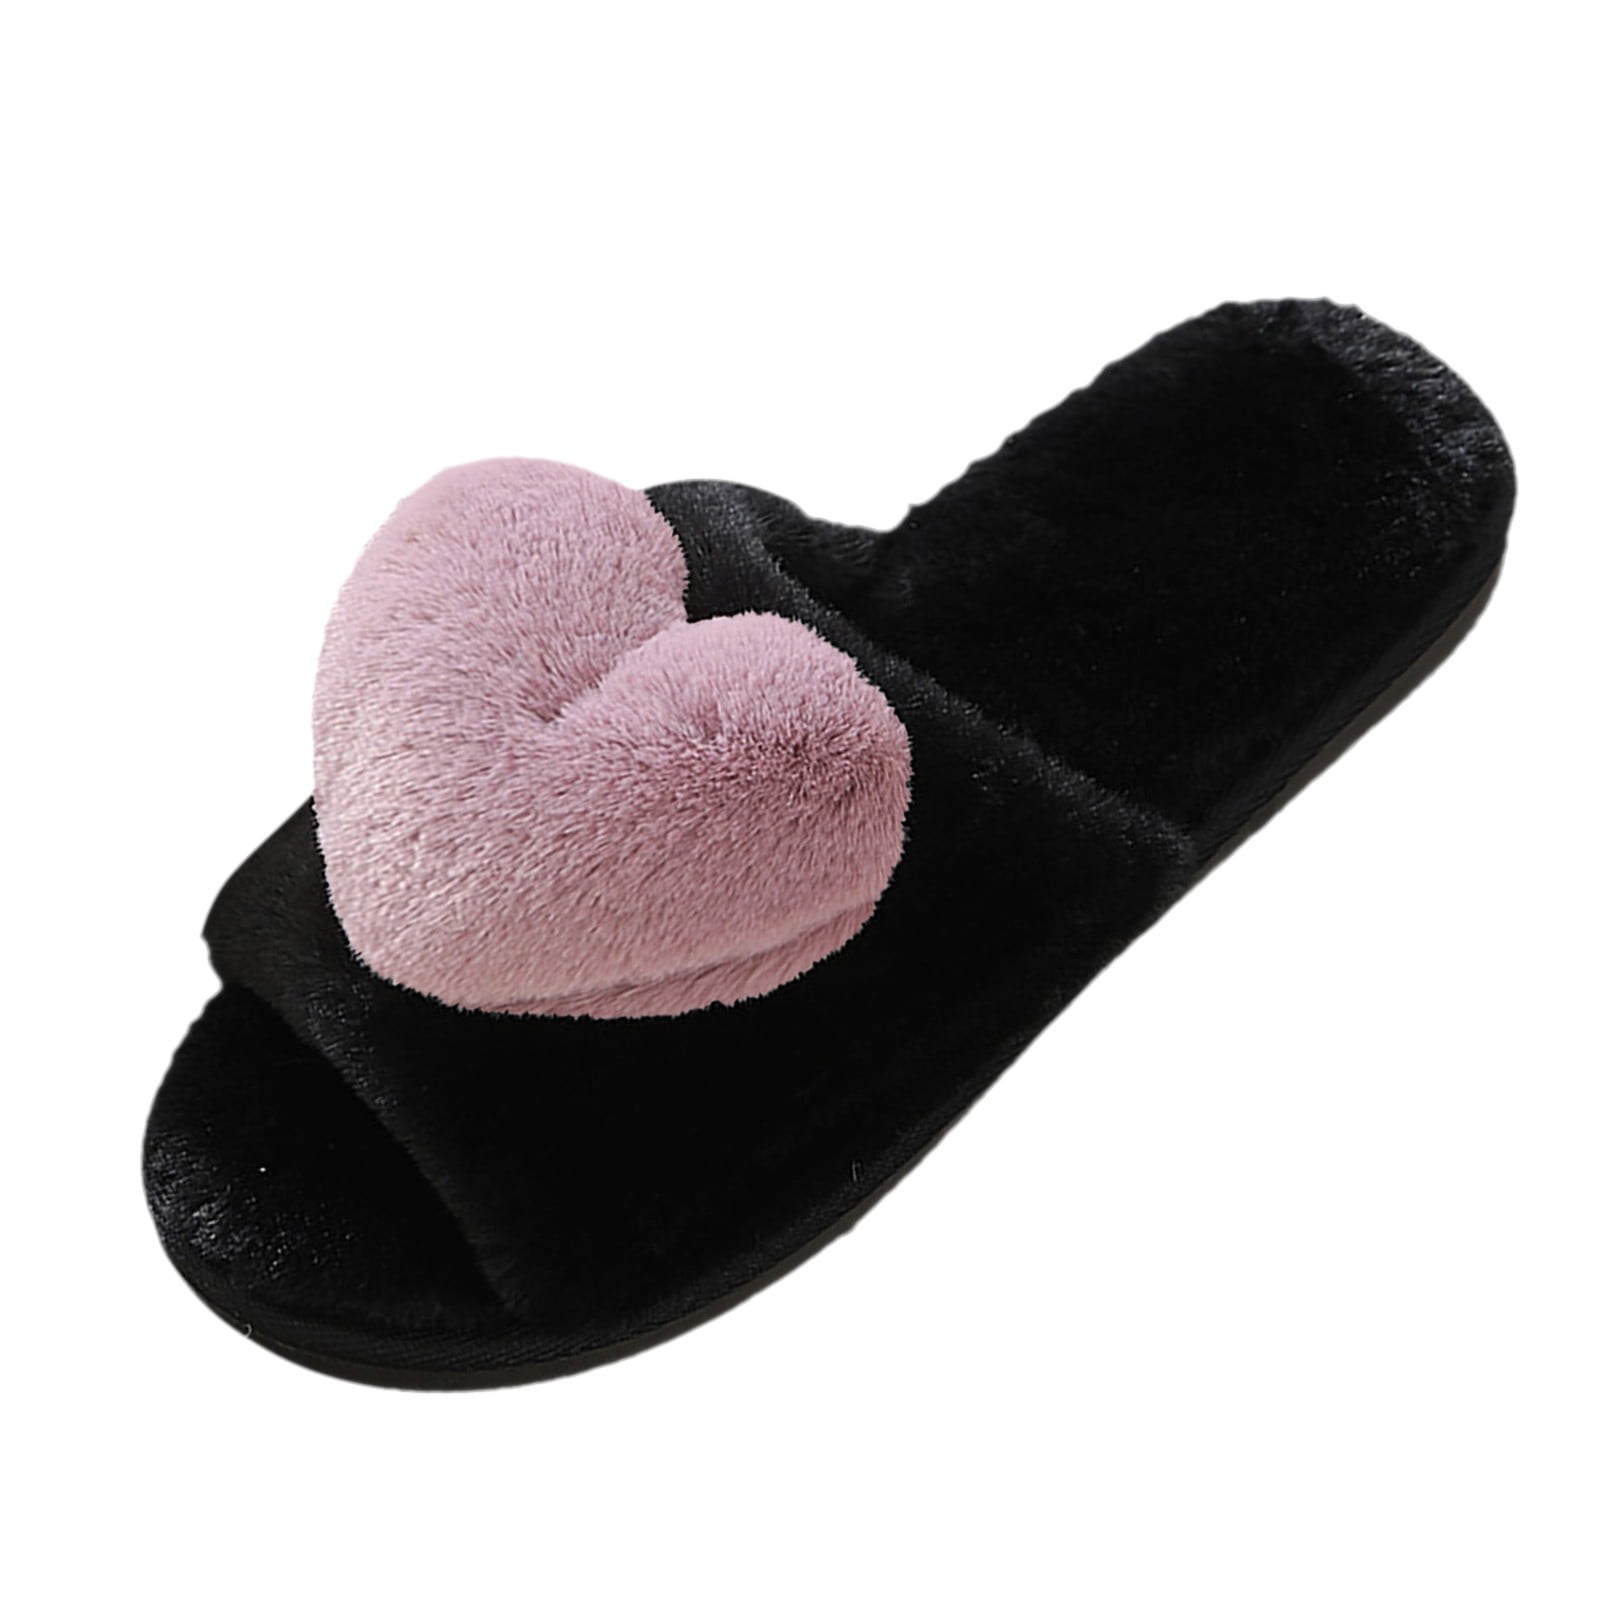 Wholesale Womens Thick Bottom Woolly Fur Slippers For Women With Foreign  Trade Warm Flat Word For Autumn And Winter From Amazing8888, $8.6 |  DHgate.Com